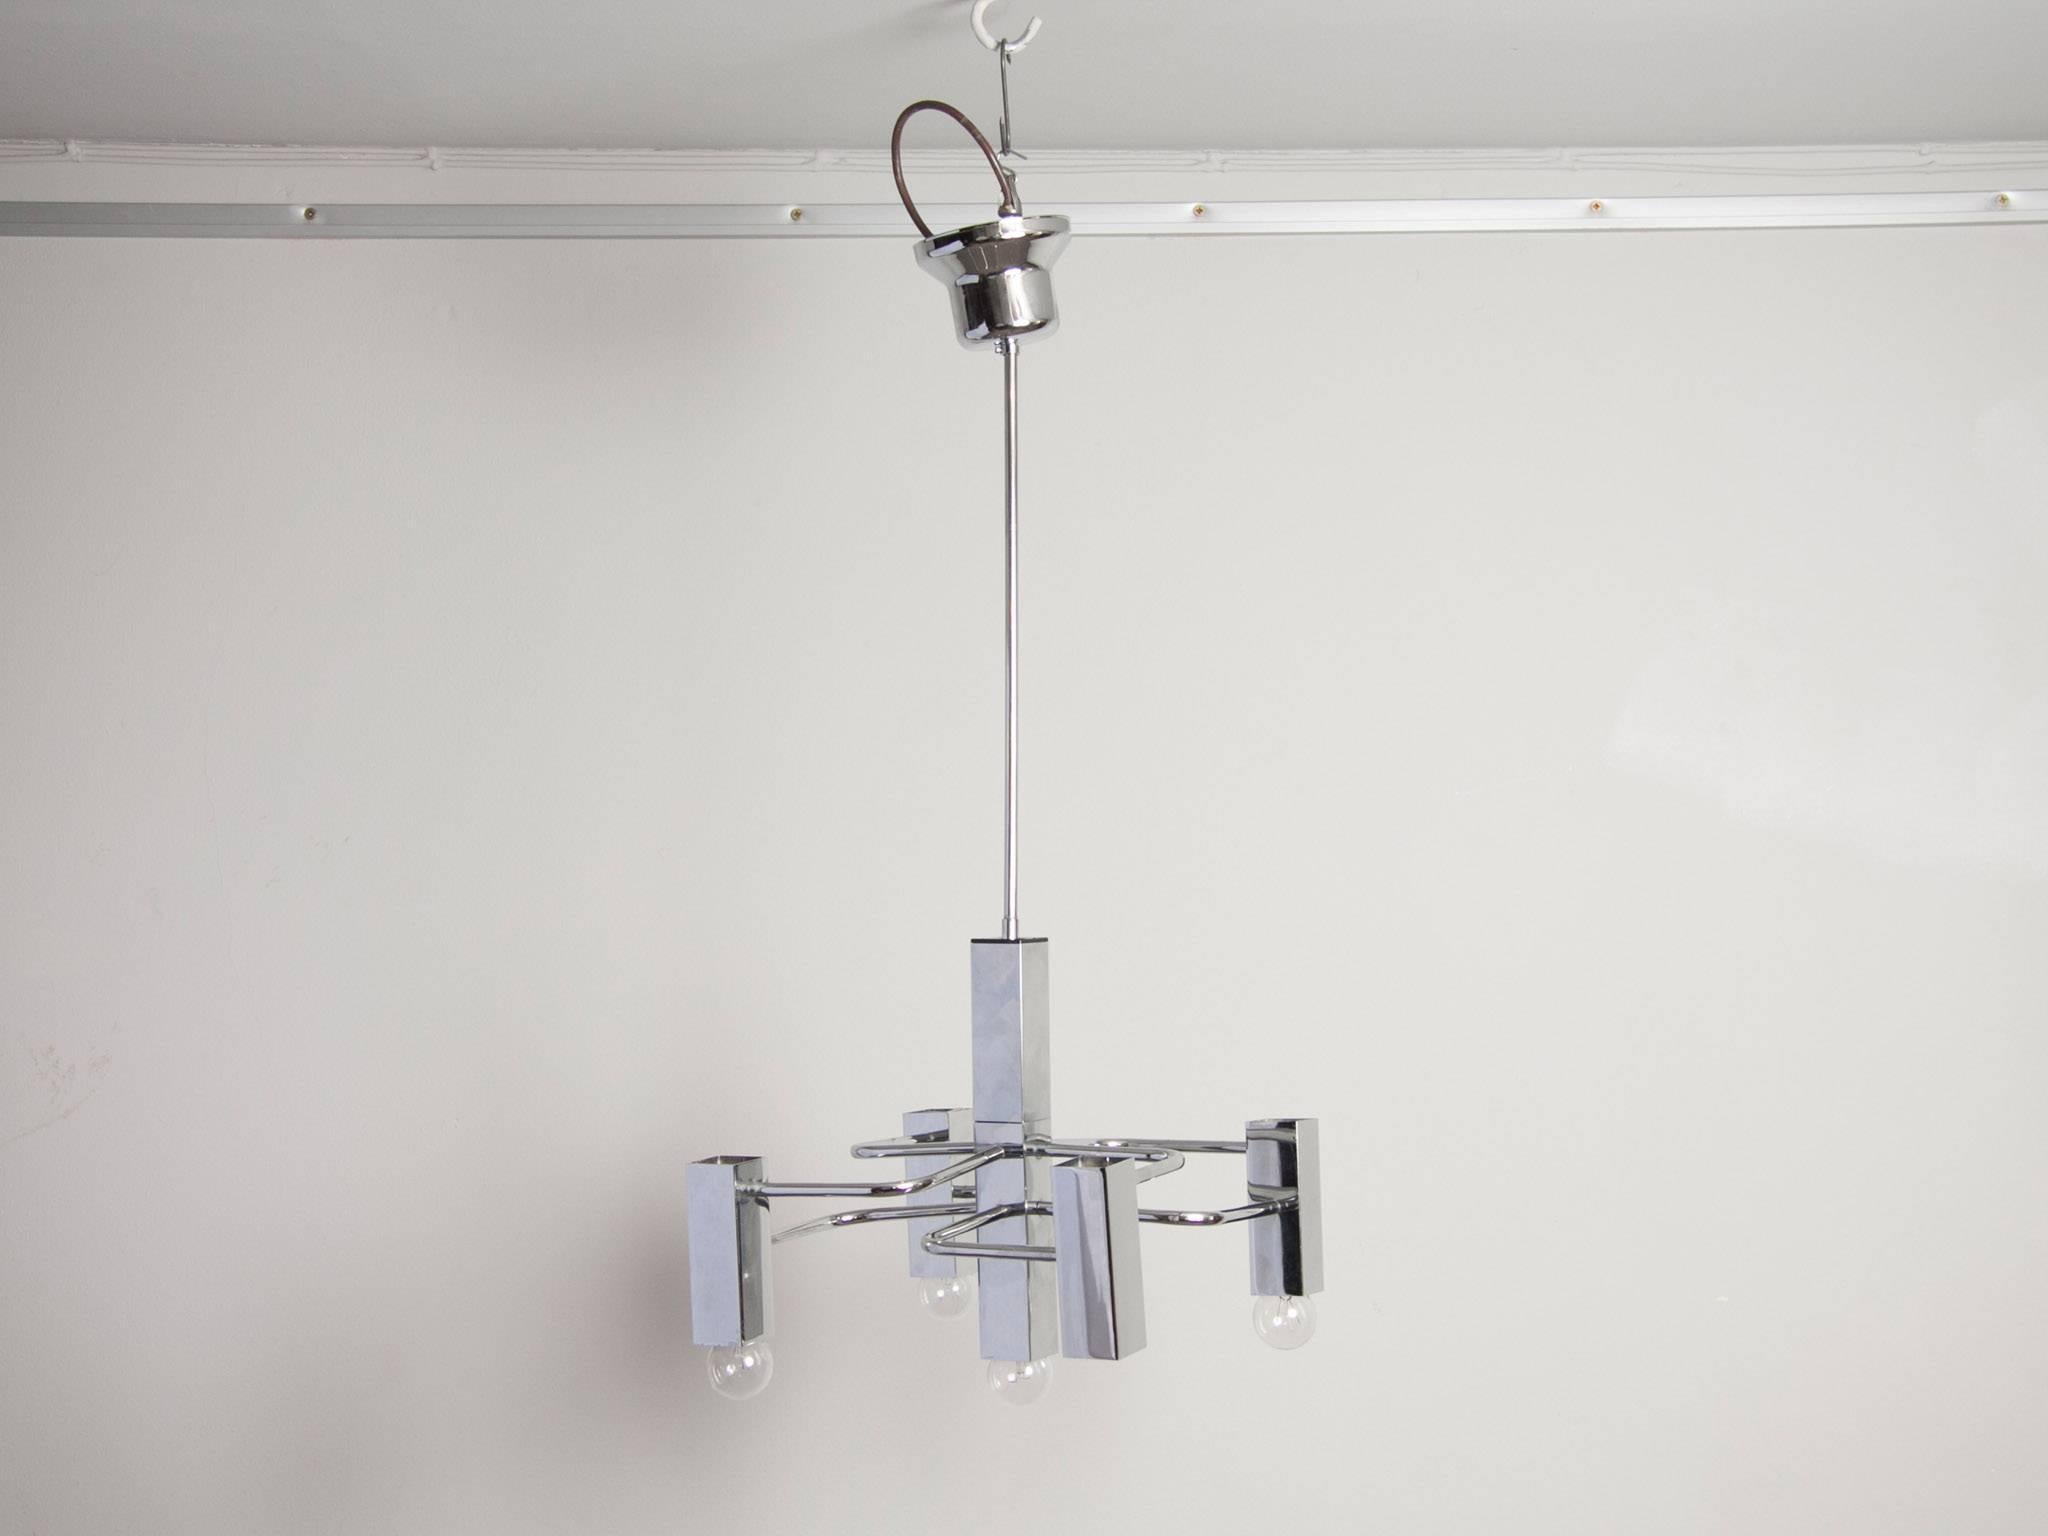 1960s hanging light designed by Gaetano Sciolari for Boulanger. Made from chromed-steel with five rectangular fittings with interlocking connecting tubes.



Measures: Total height 71 cm.
Height cylinders: 4 x 15 cm, 1x 31 cm.
Diameter